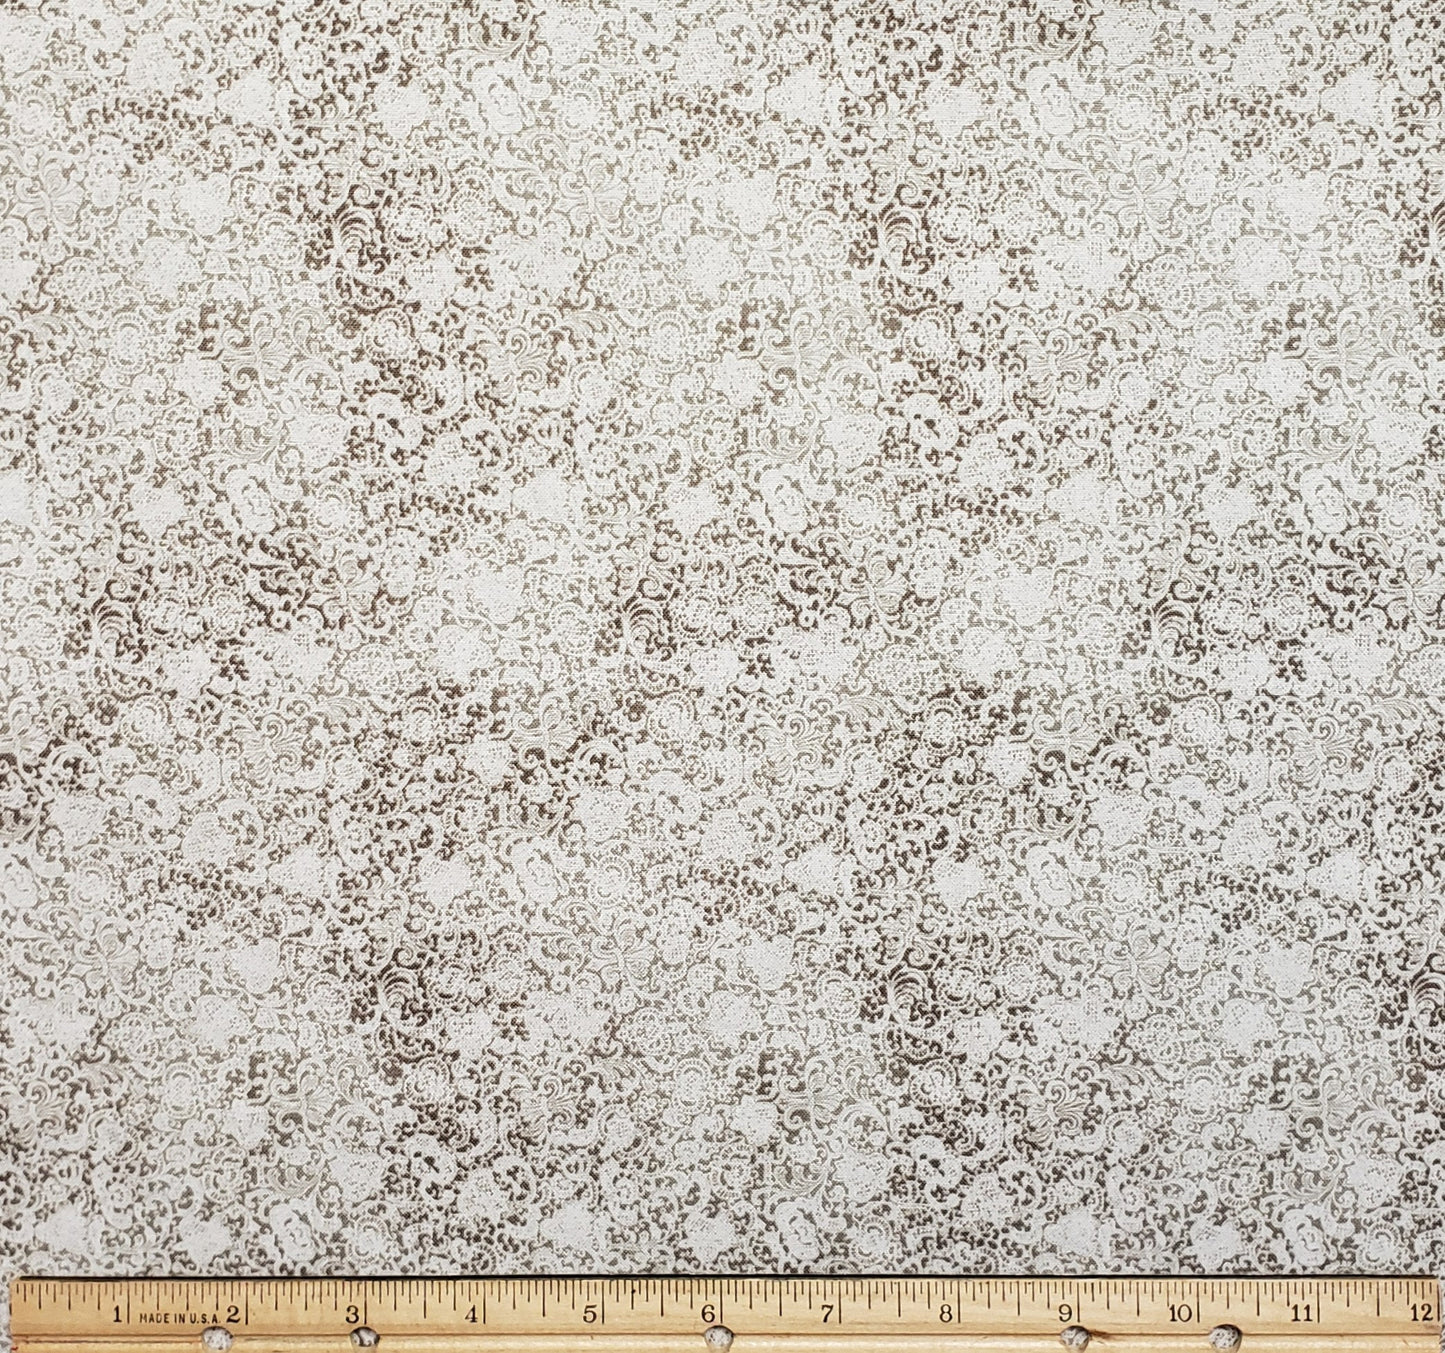 Designed and Produced Exclusively for JoAnn Fabric and Craft Stores - Printed in South Korea - White Fabric with Brown and Tan Lace Print